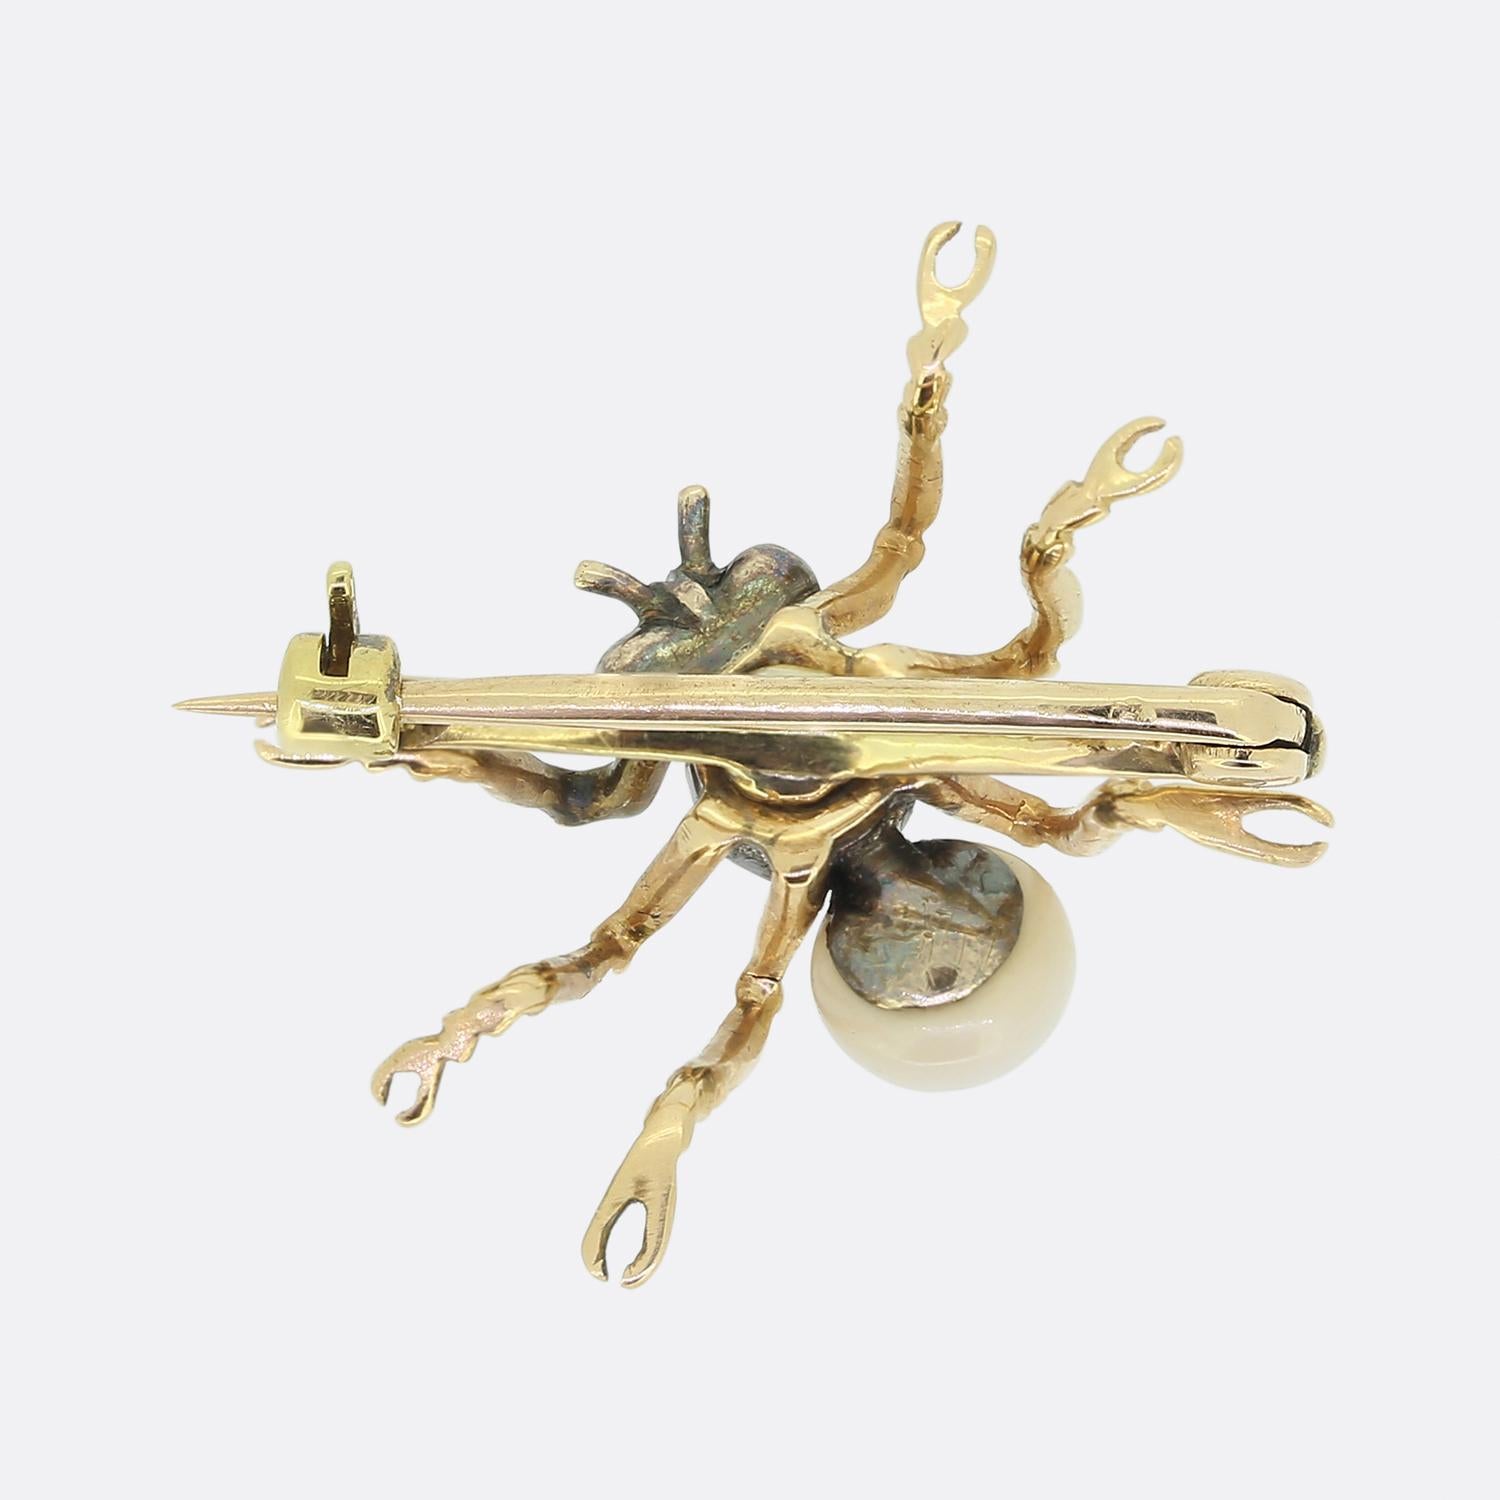 Here we have a wonderfully detailed antique brooch crafted into the shape of a six-legged bug. A silver cut-collet set old cushion cut diamond acts as the body with an off-round white pearl sitting just below. These focal gemstones play host to gold